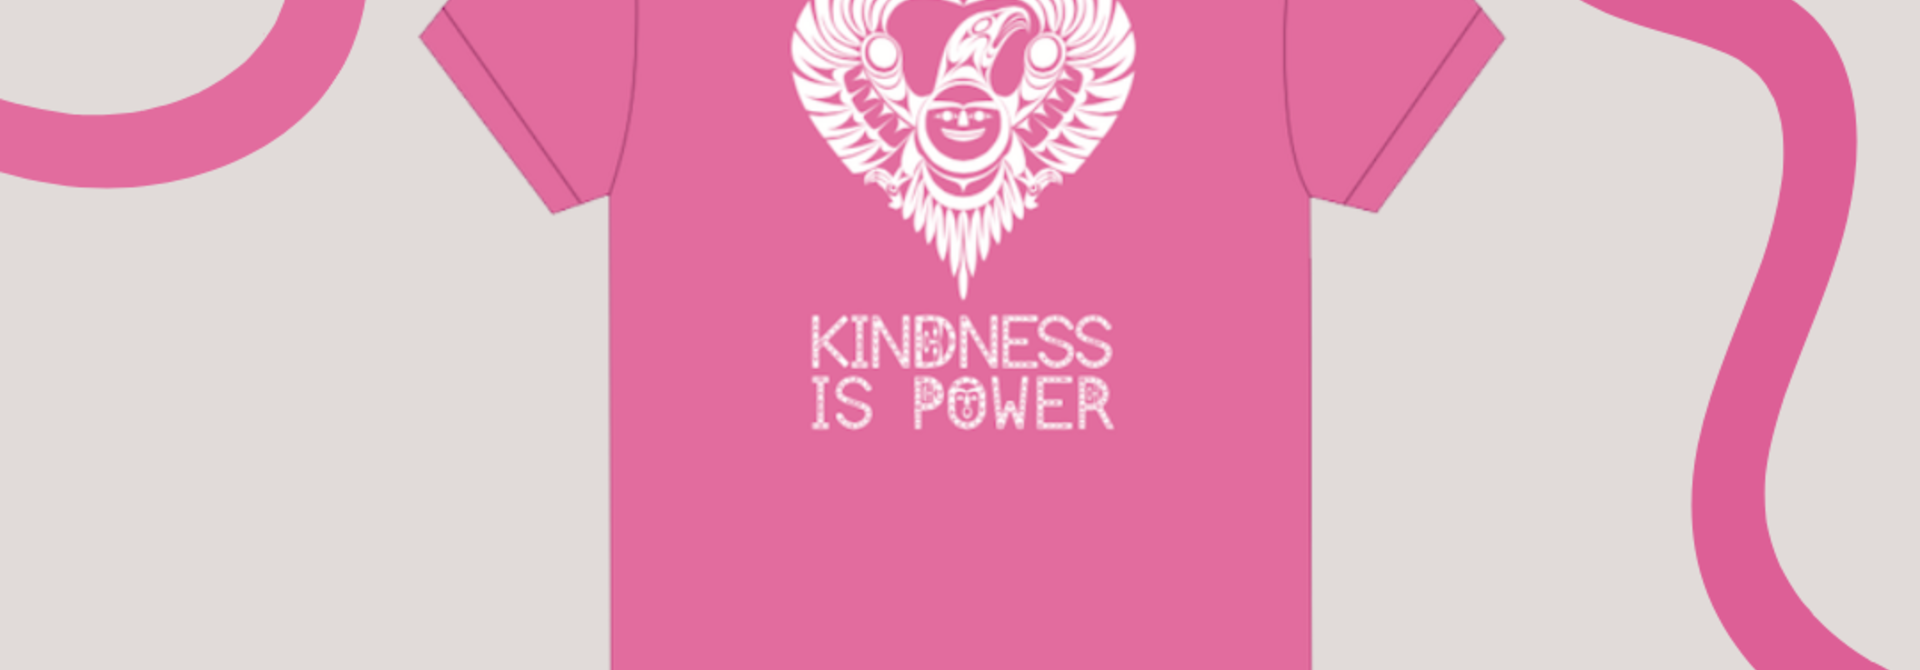 Kindness is Power - Pink Shirt by Francis Horne Sr. - Youth Sizes